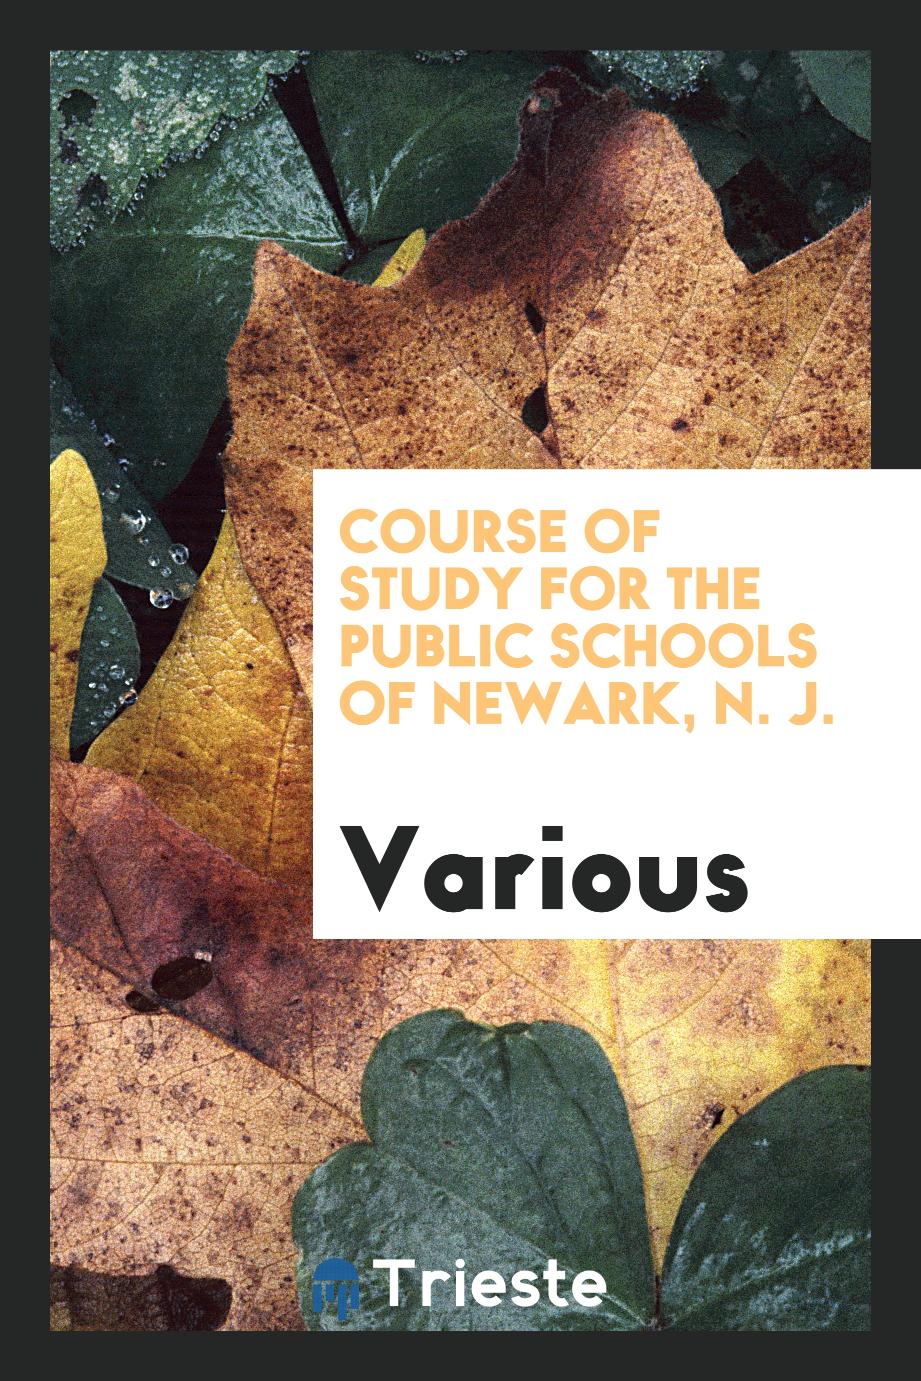 Course of Study for the Public Schools of Newark, N. J.